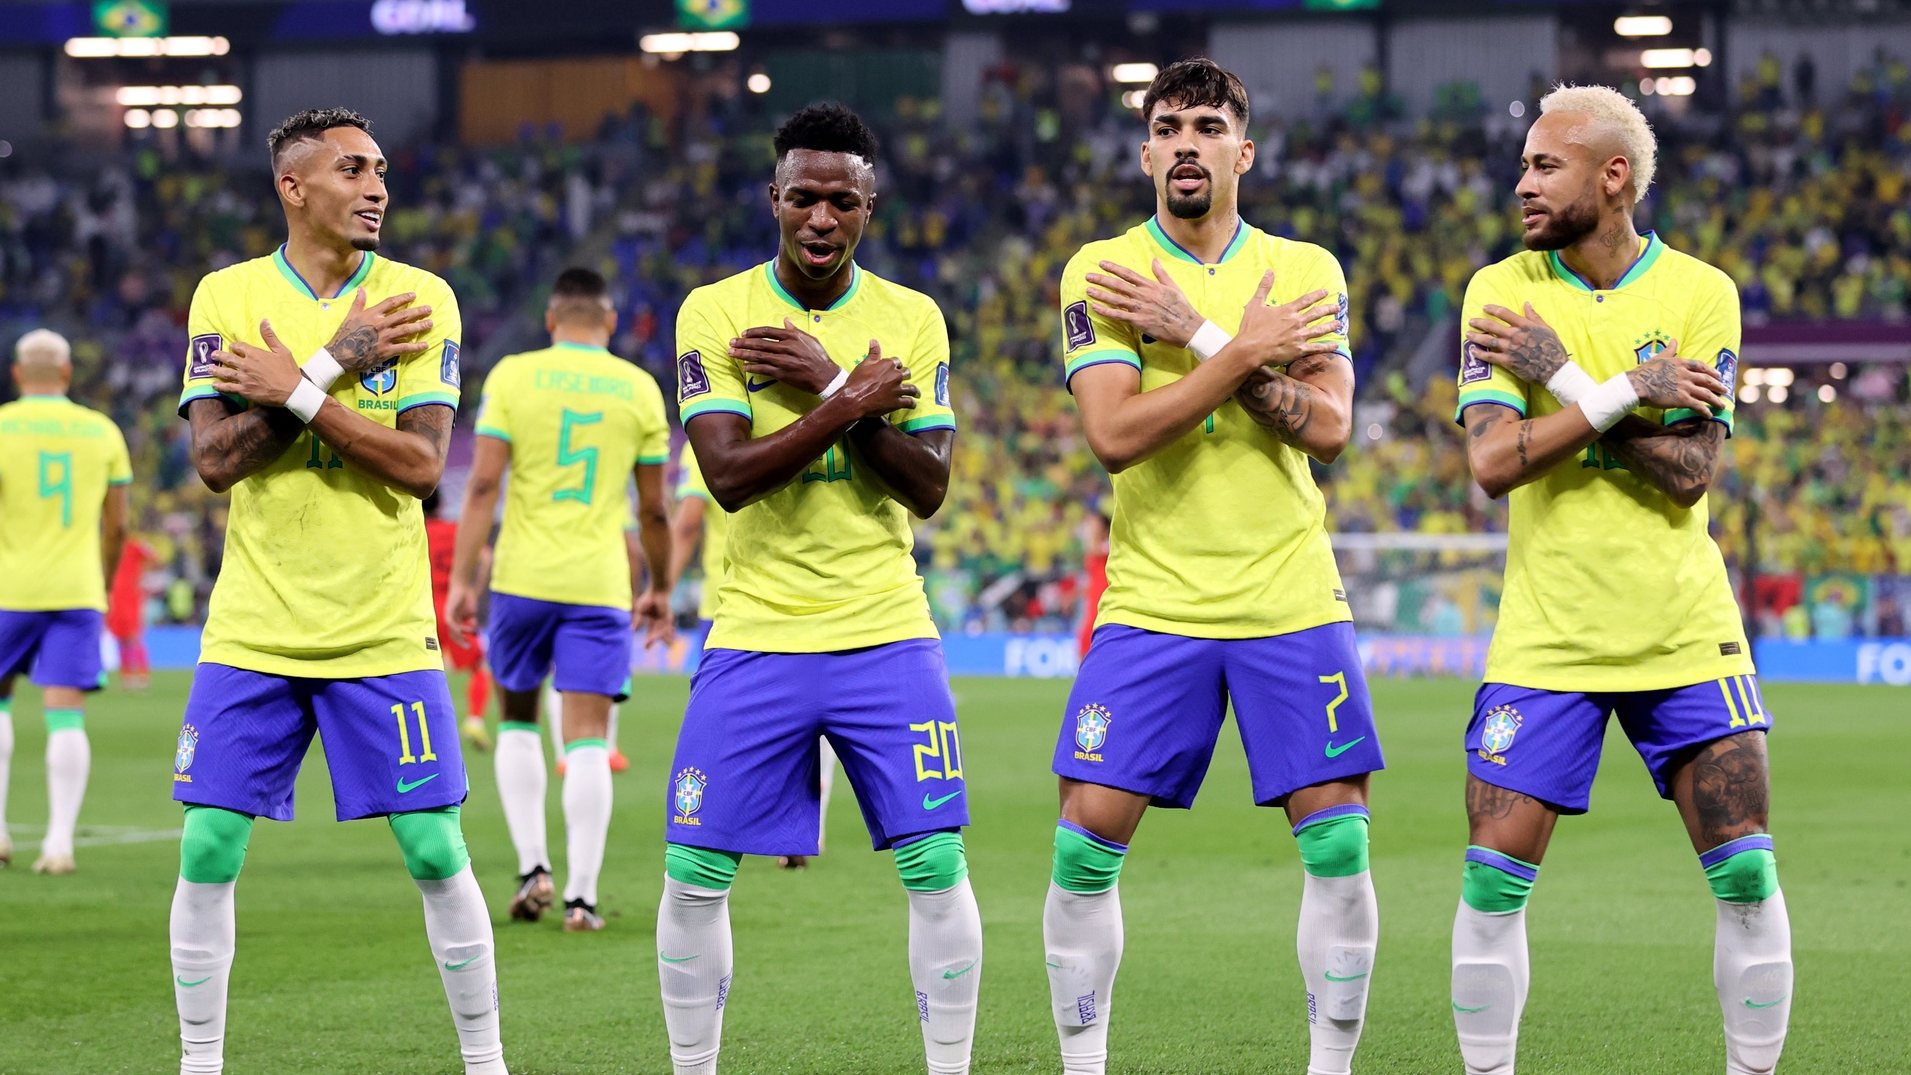 epa10350416 Vinicius Junior of Brazil (2L) celebrates Raphinha (L), Lucas Paqueta (2R) and Neymar (R) after scoring the 1-0 during the FIFA World Cup 2022 round of 16 soccer match between Brazil and South Korea at Stadium 974 in Doha, Qatar, 05 December 2022.  EPA/Abedin Taherkenareh